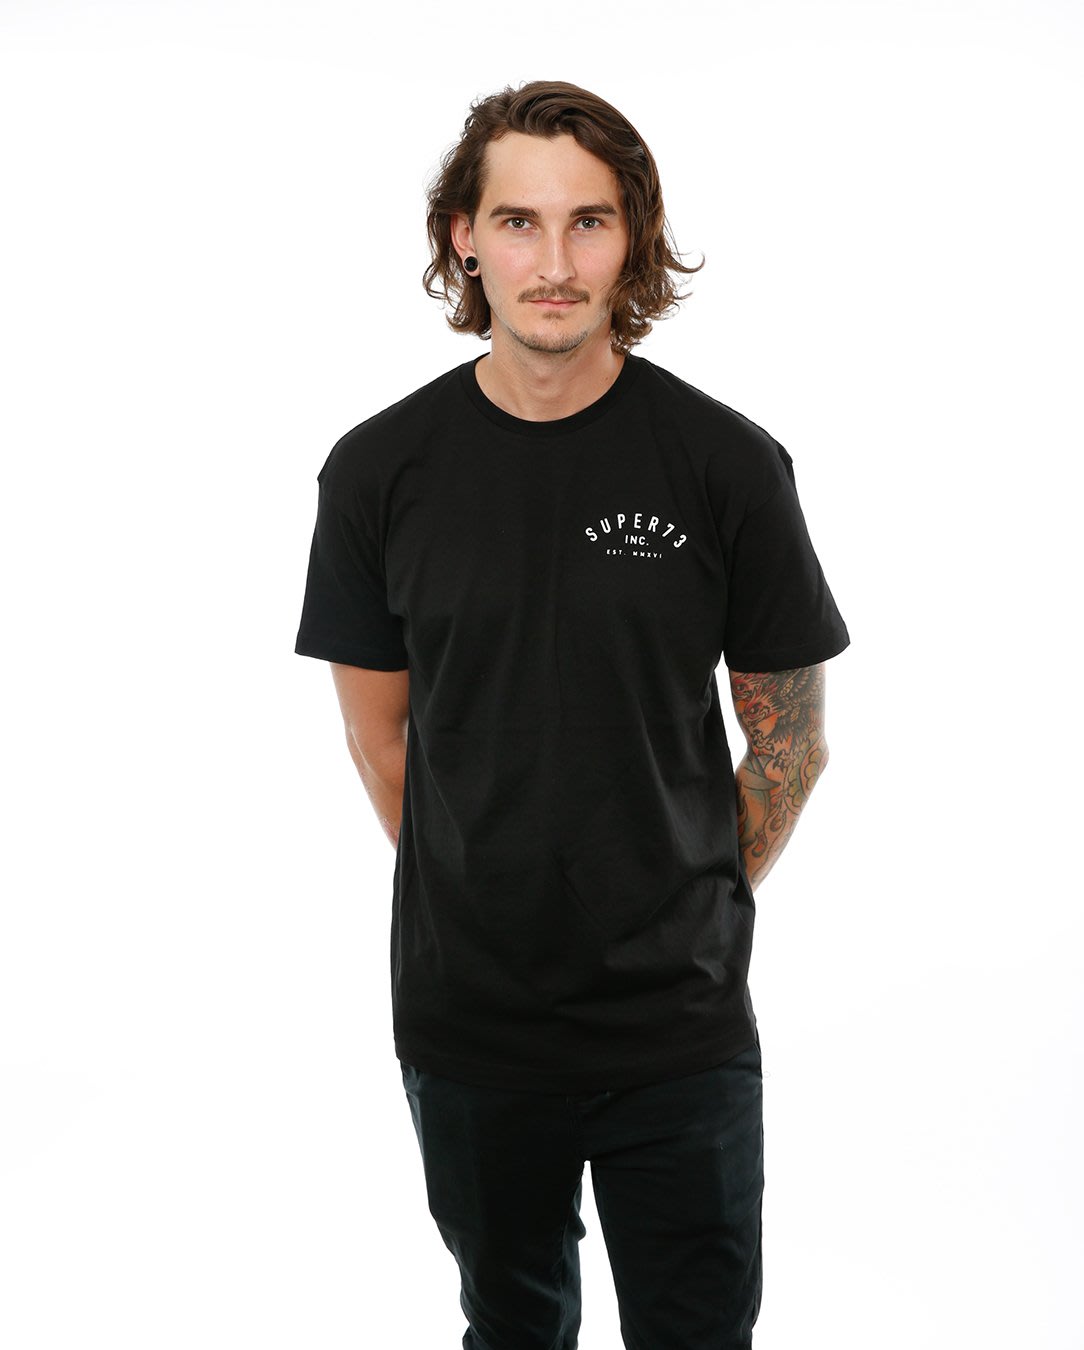 Front view of male model in Black Classic Short Sleeve T-Shirt on white background.